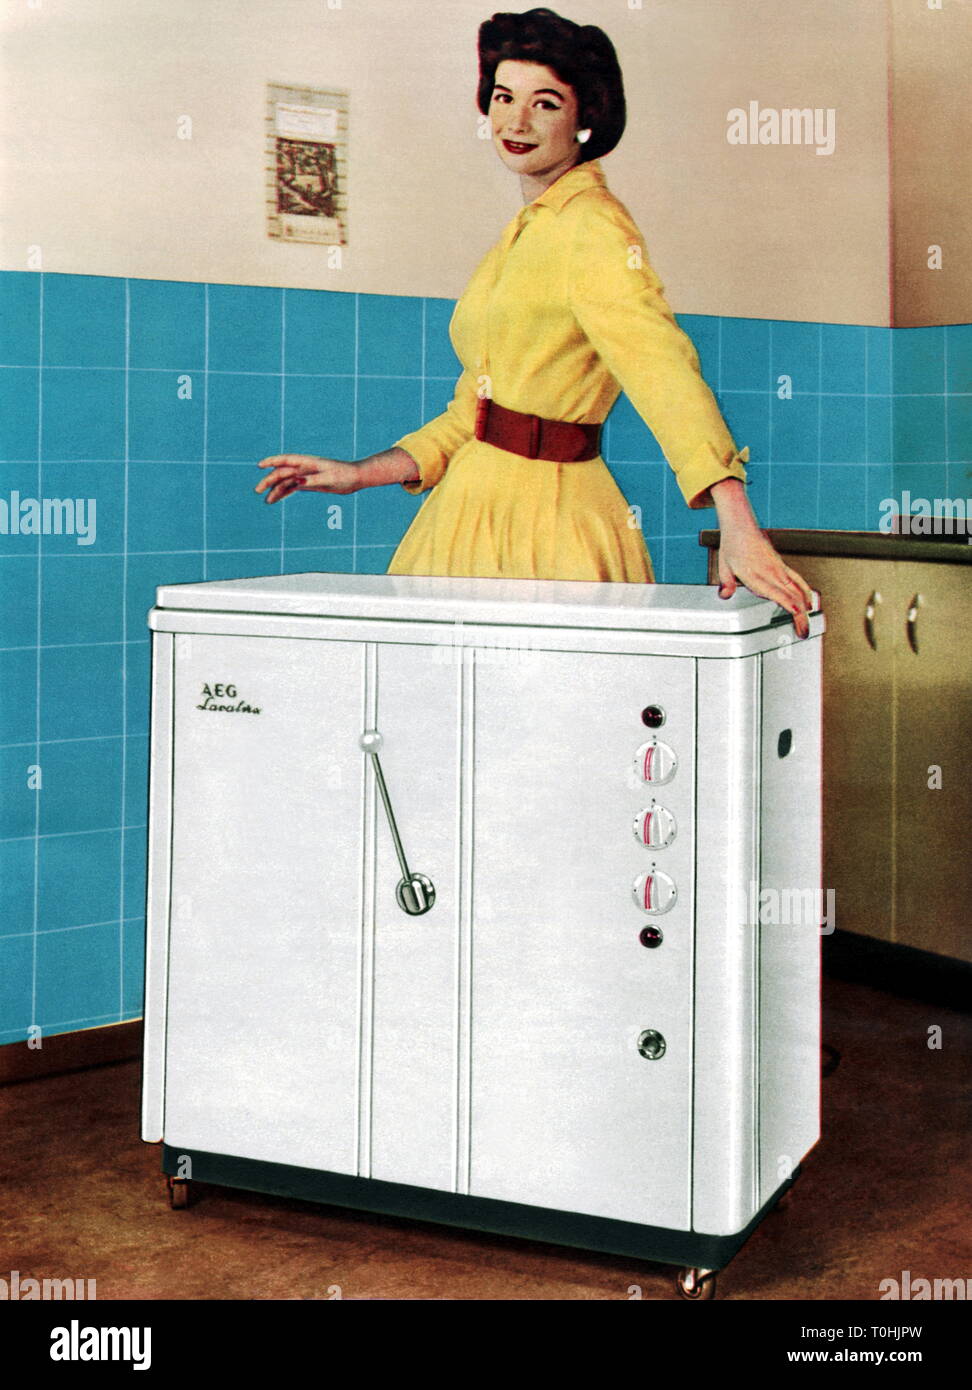 household, laundering, housewife with washing machine, advertising for washing combination AEG Lavalux, washing machine and spin dryer in one unit, original price 1957: 940 DM, Germany, 1957, Additional-Rights-Clearance-Info-Not-Available Stock Photo